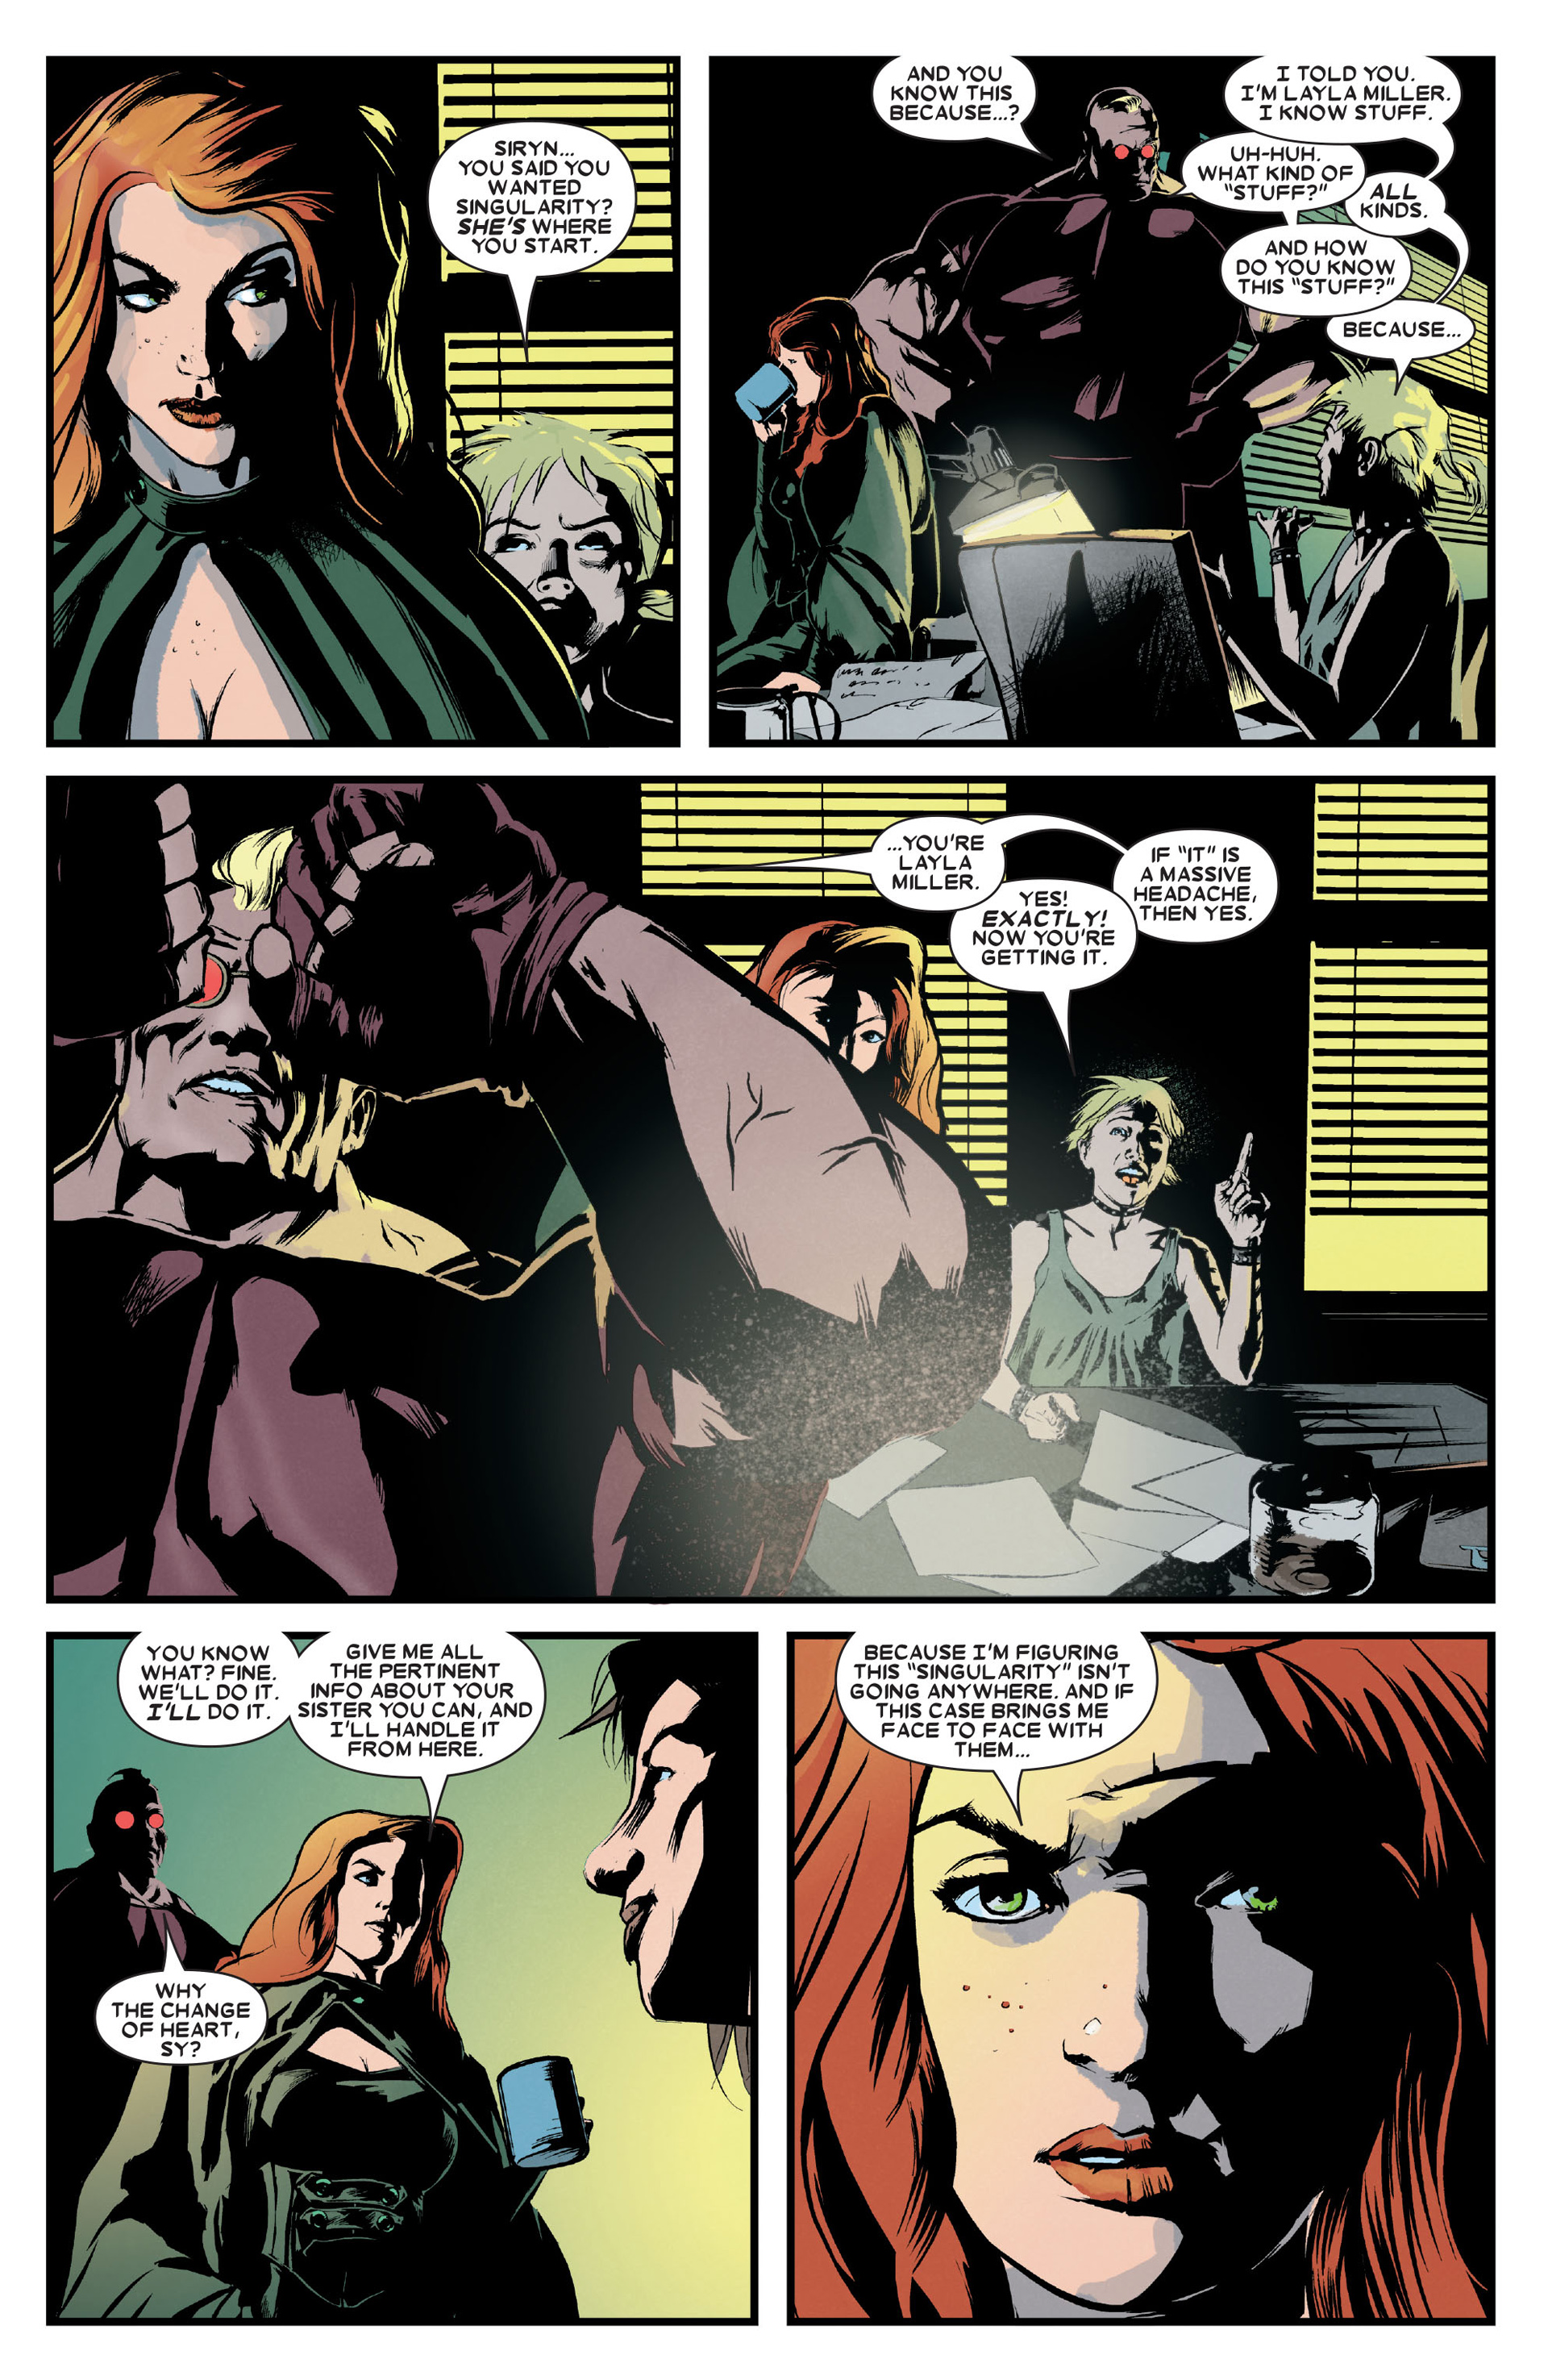 X-Factor (2006) 2 Page 10